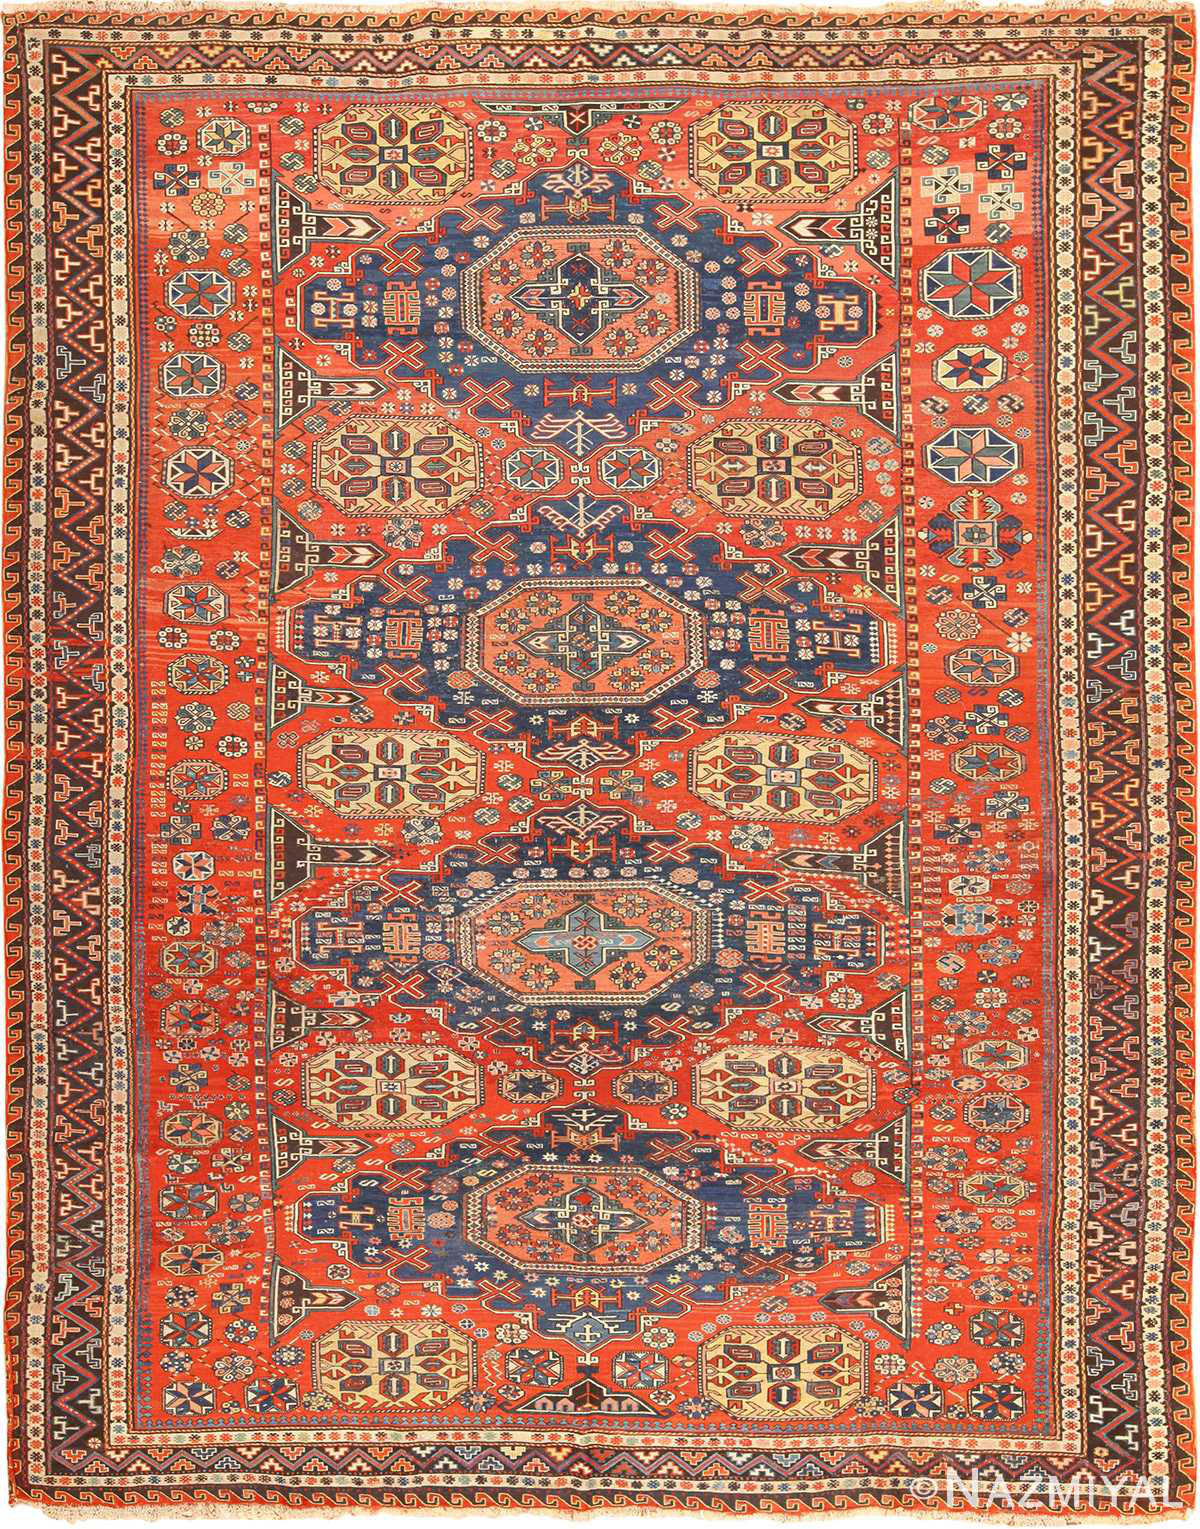 Blue Parakeet Rugs Antique Persian Scatter Rug No. 2491